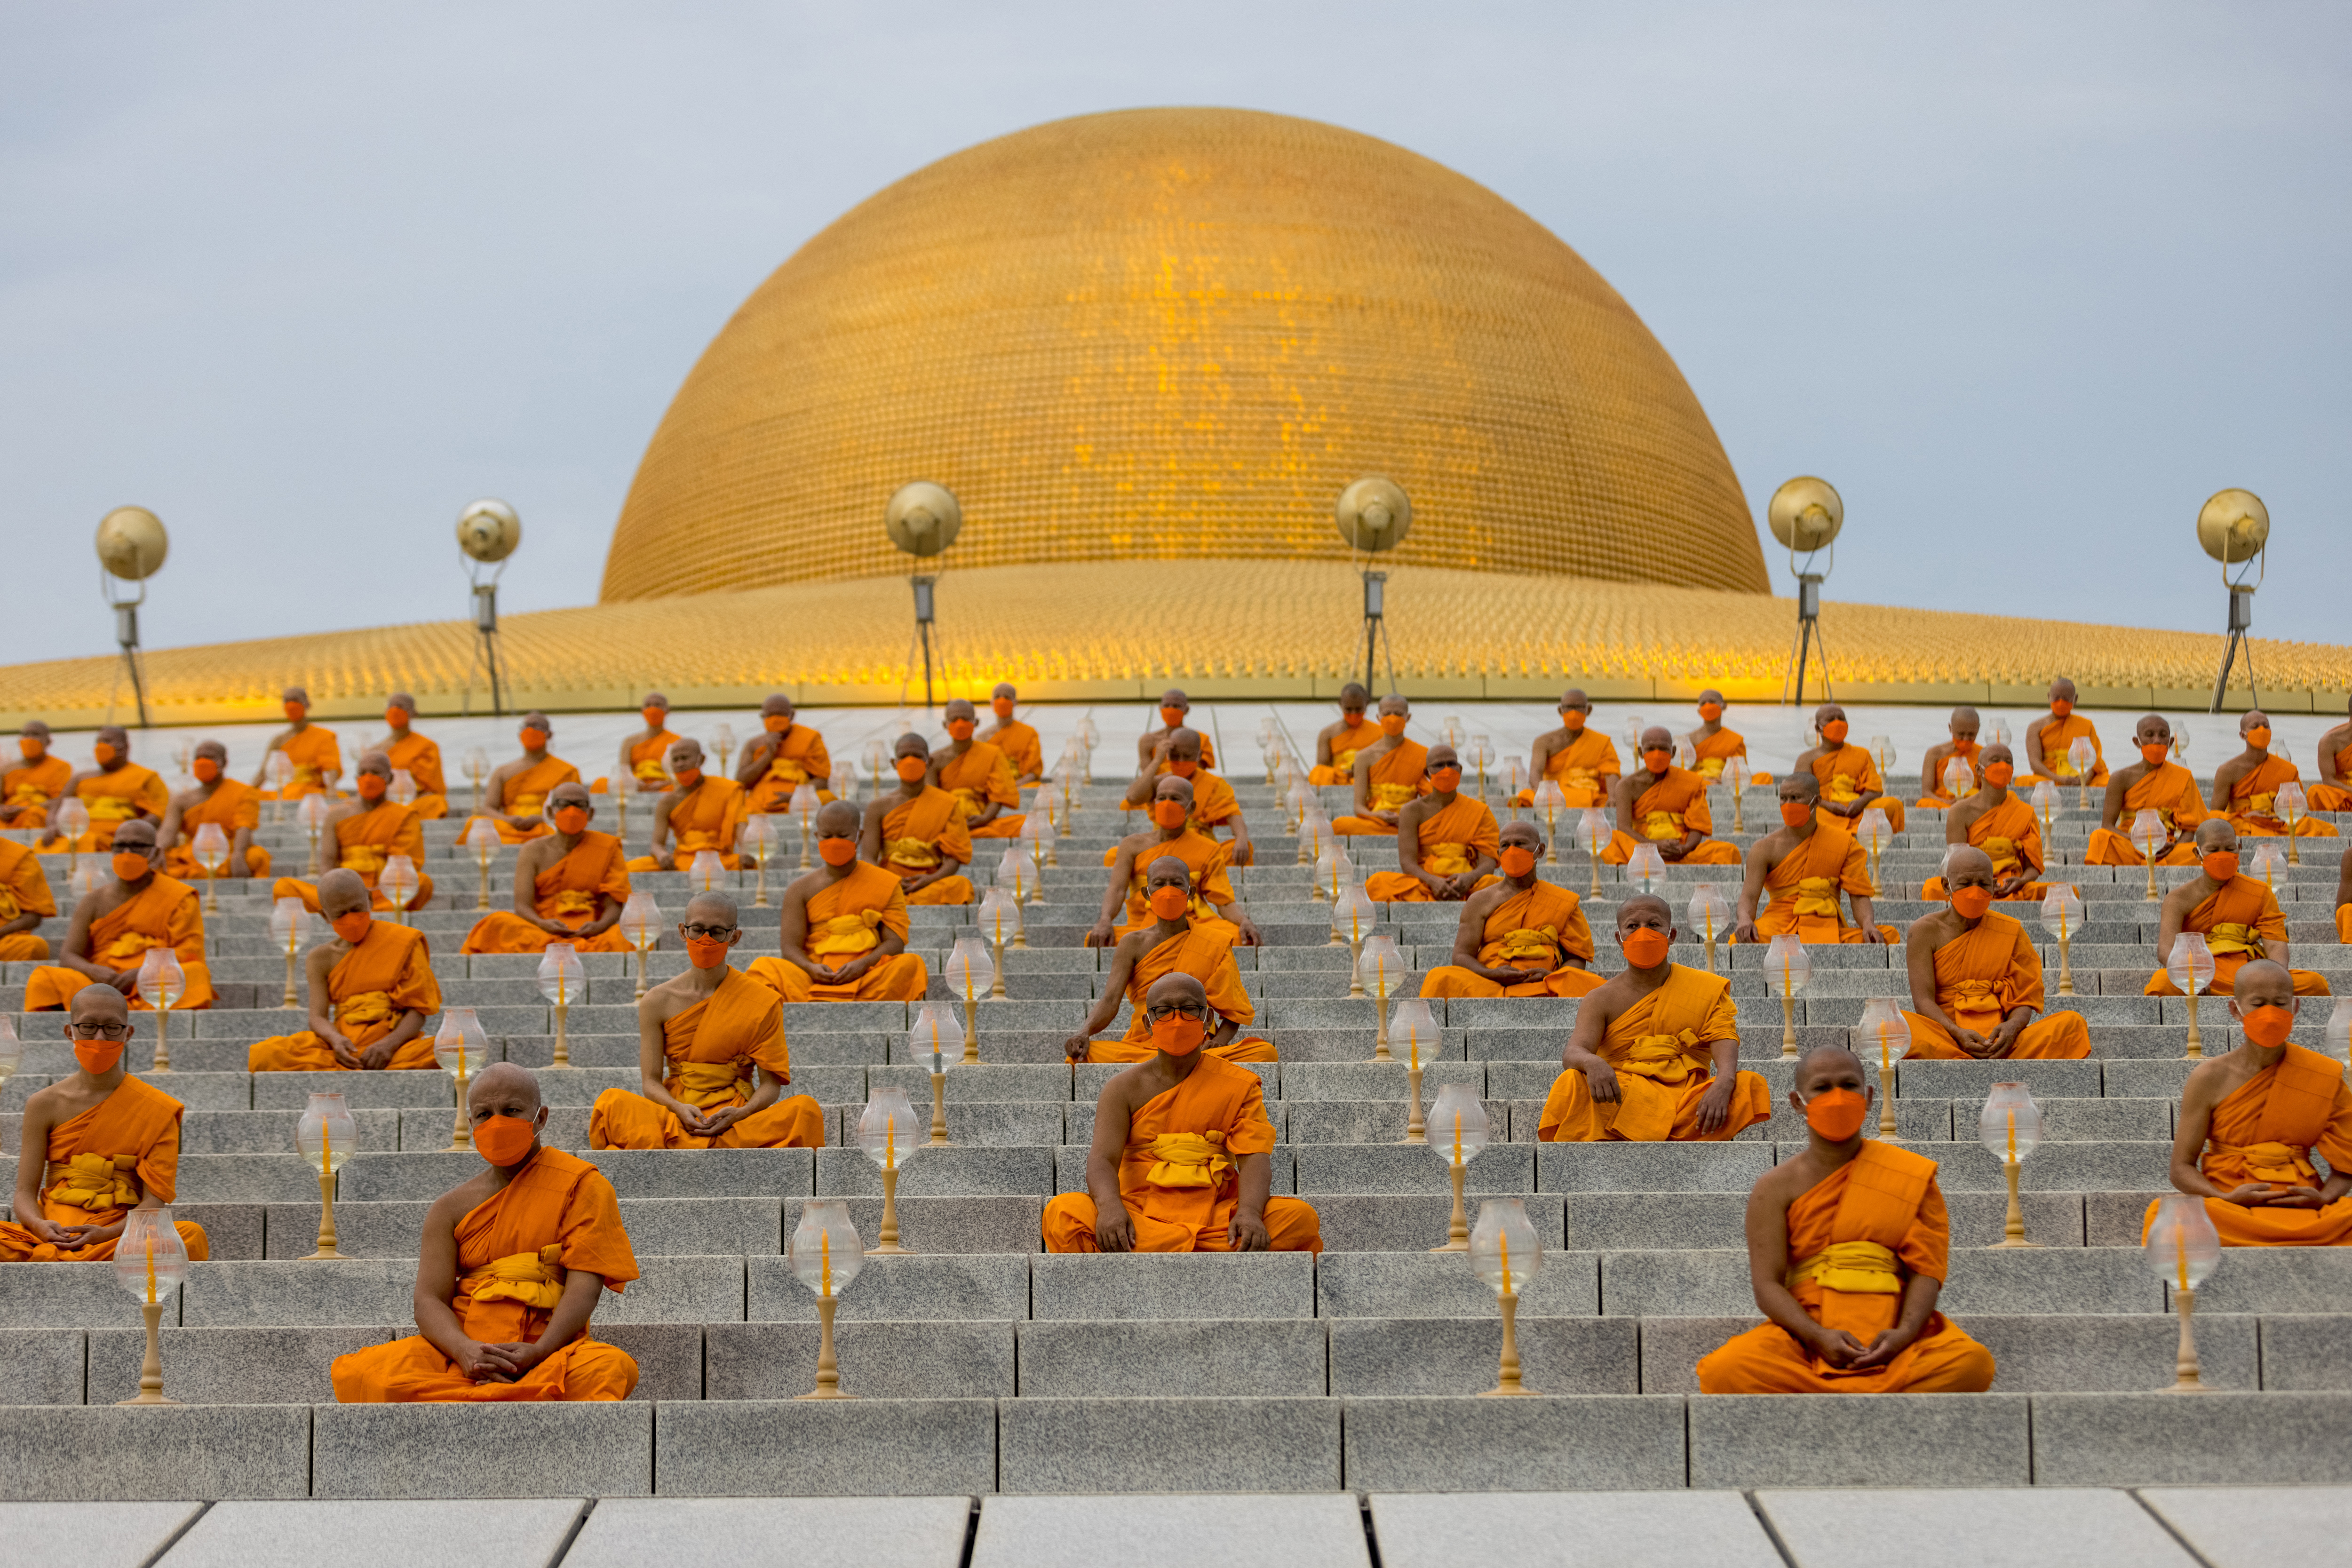 Buddhist monks in Thailand have been caught cocomimmiting crimes such as drug trafficking, embezzlement, corruption, and murder. 